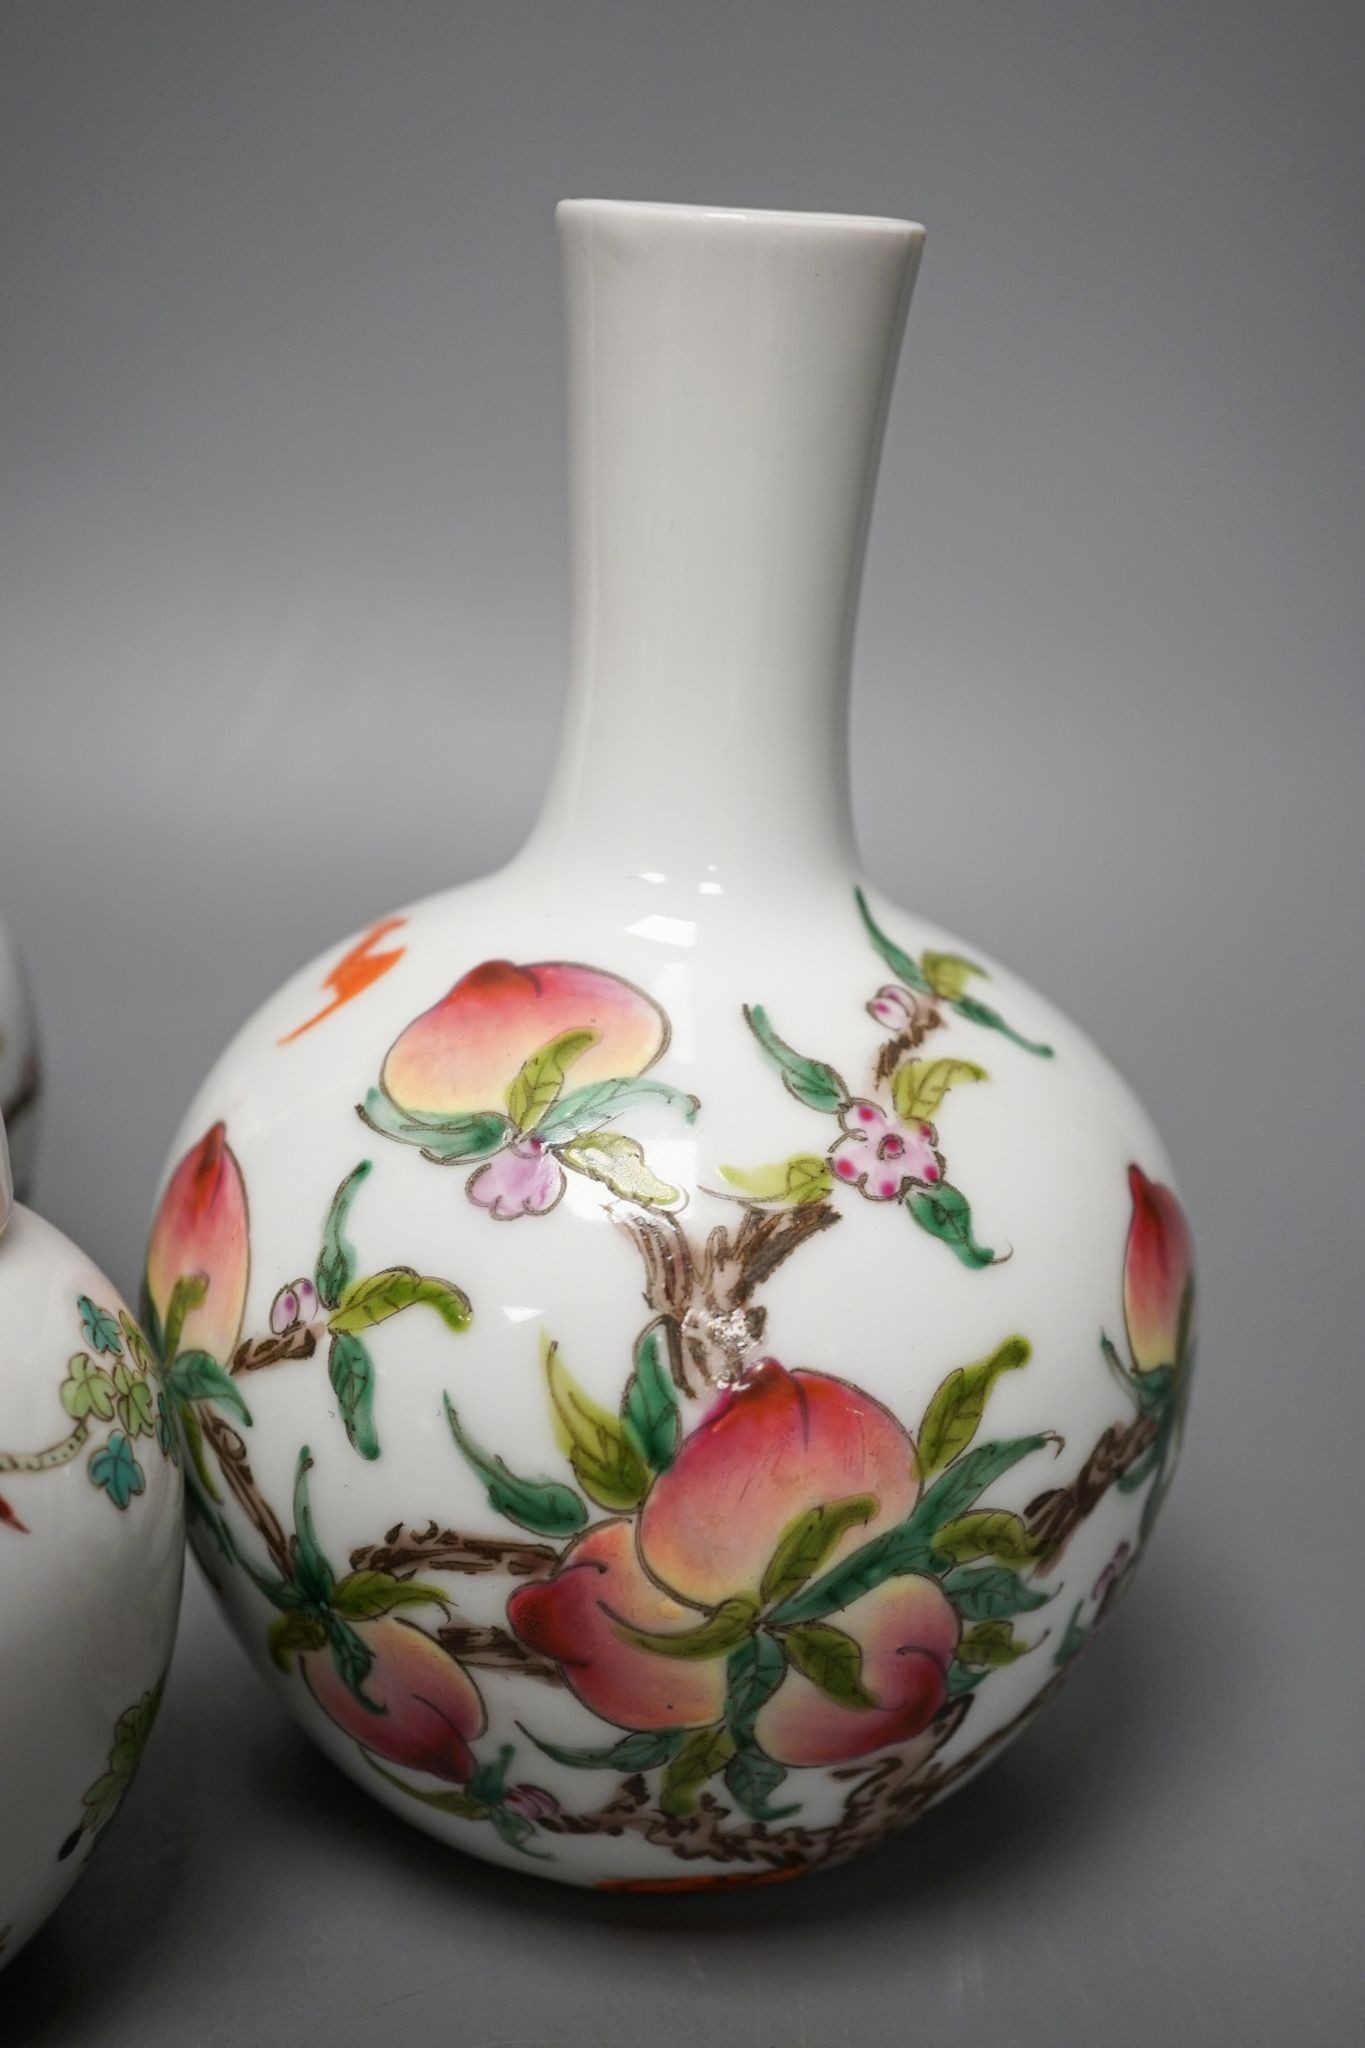 A pair of Chinese famille rose ‘peach’ bottle vases, 17cm, a ‘phoenix’ jar and cover, two porcelain cups and a boxed set of bamboo tallies or counters (6)